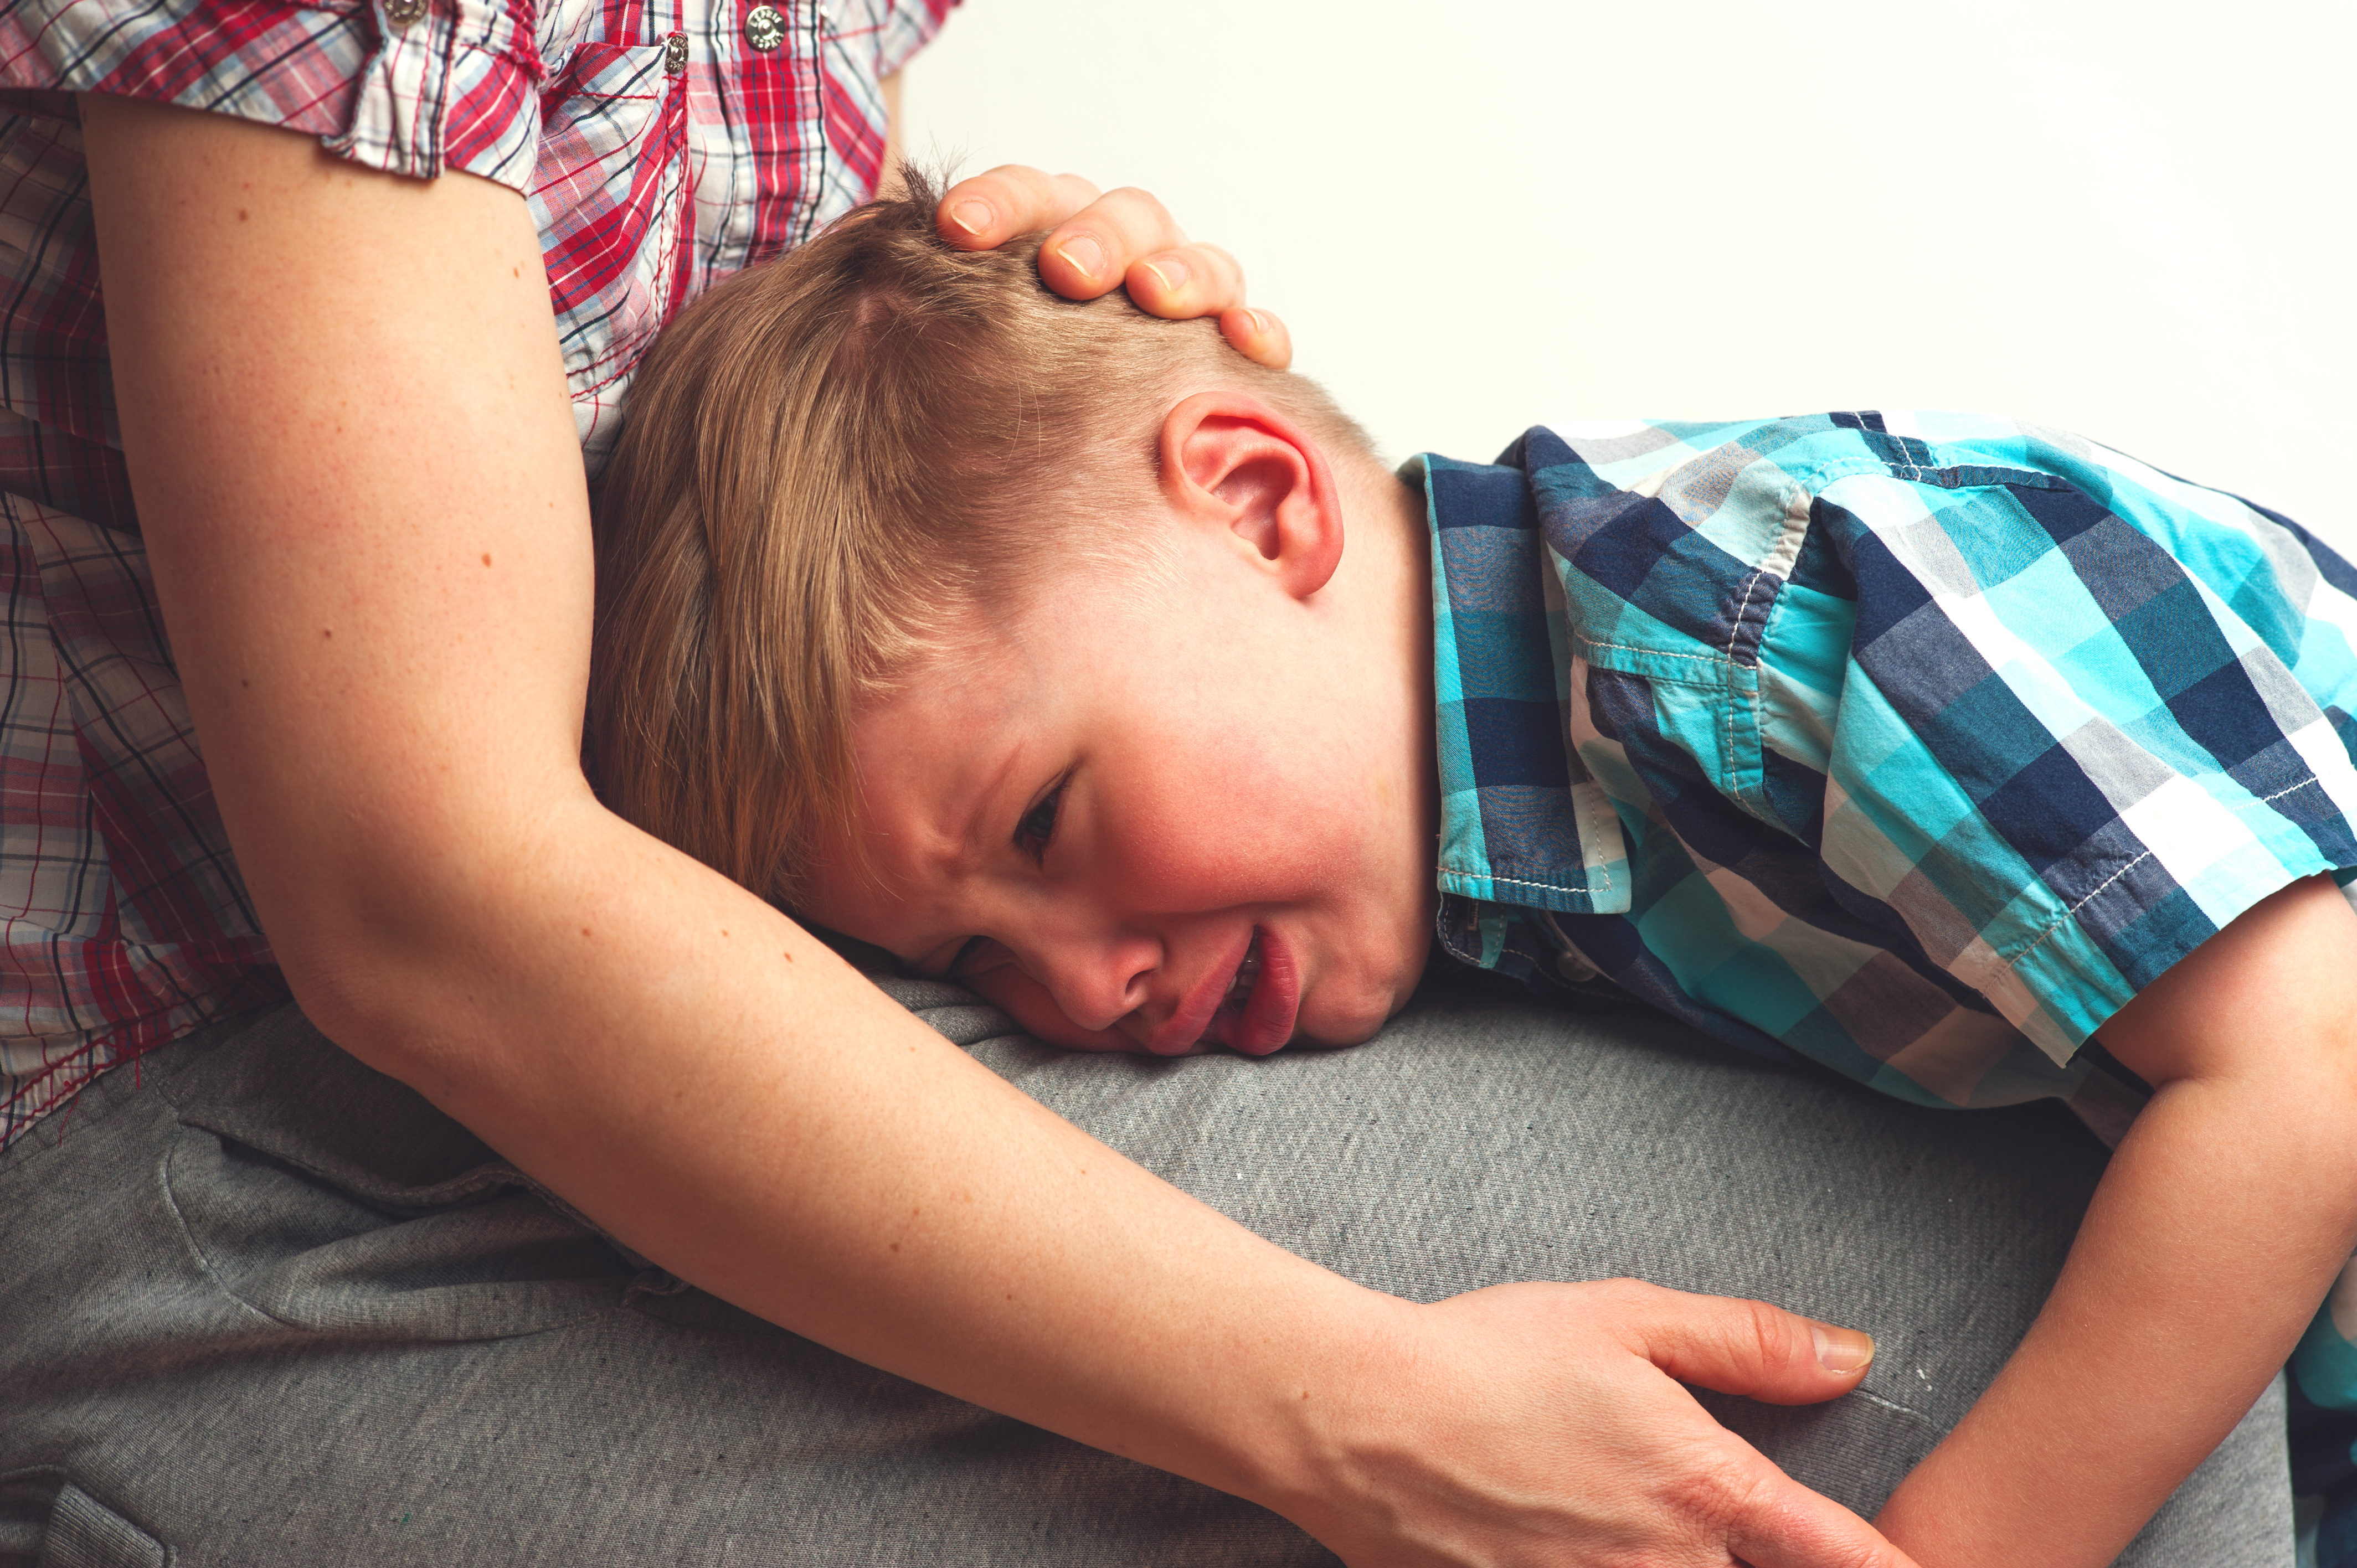 Why do many parents struggle to cope with their child&#39;s cries? - The Way of the Peaceful Parent